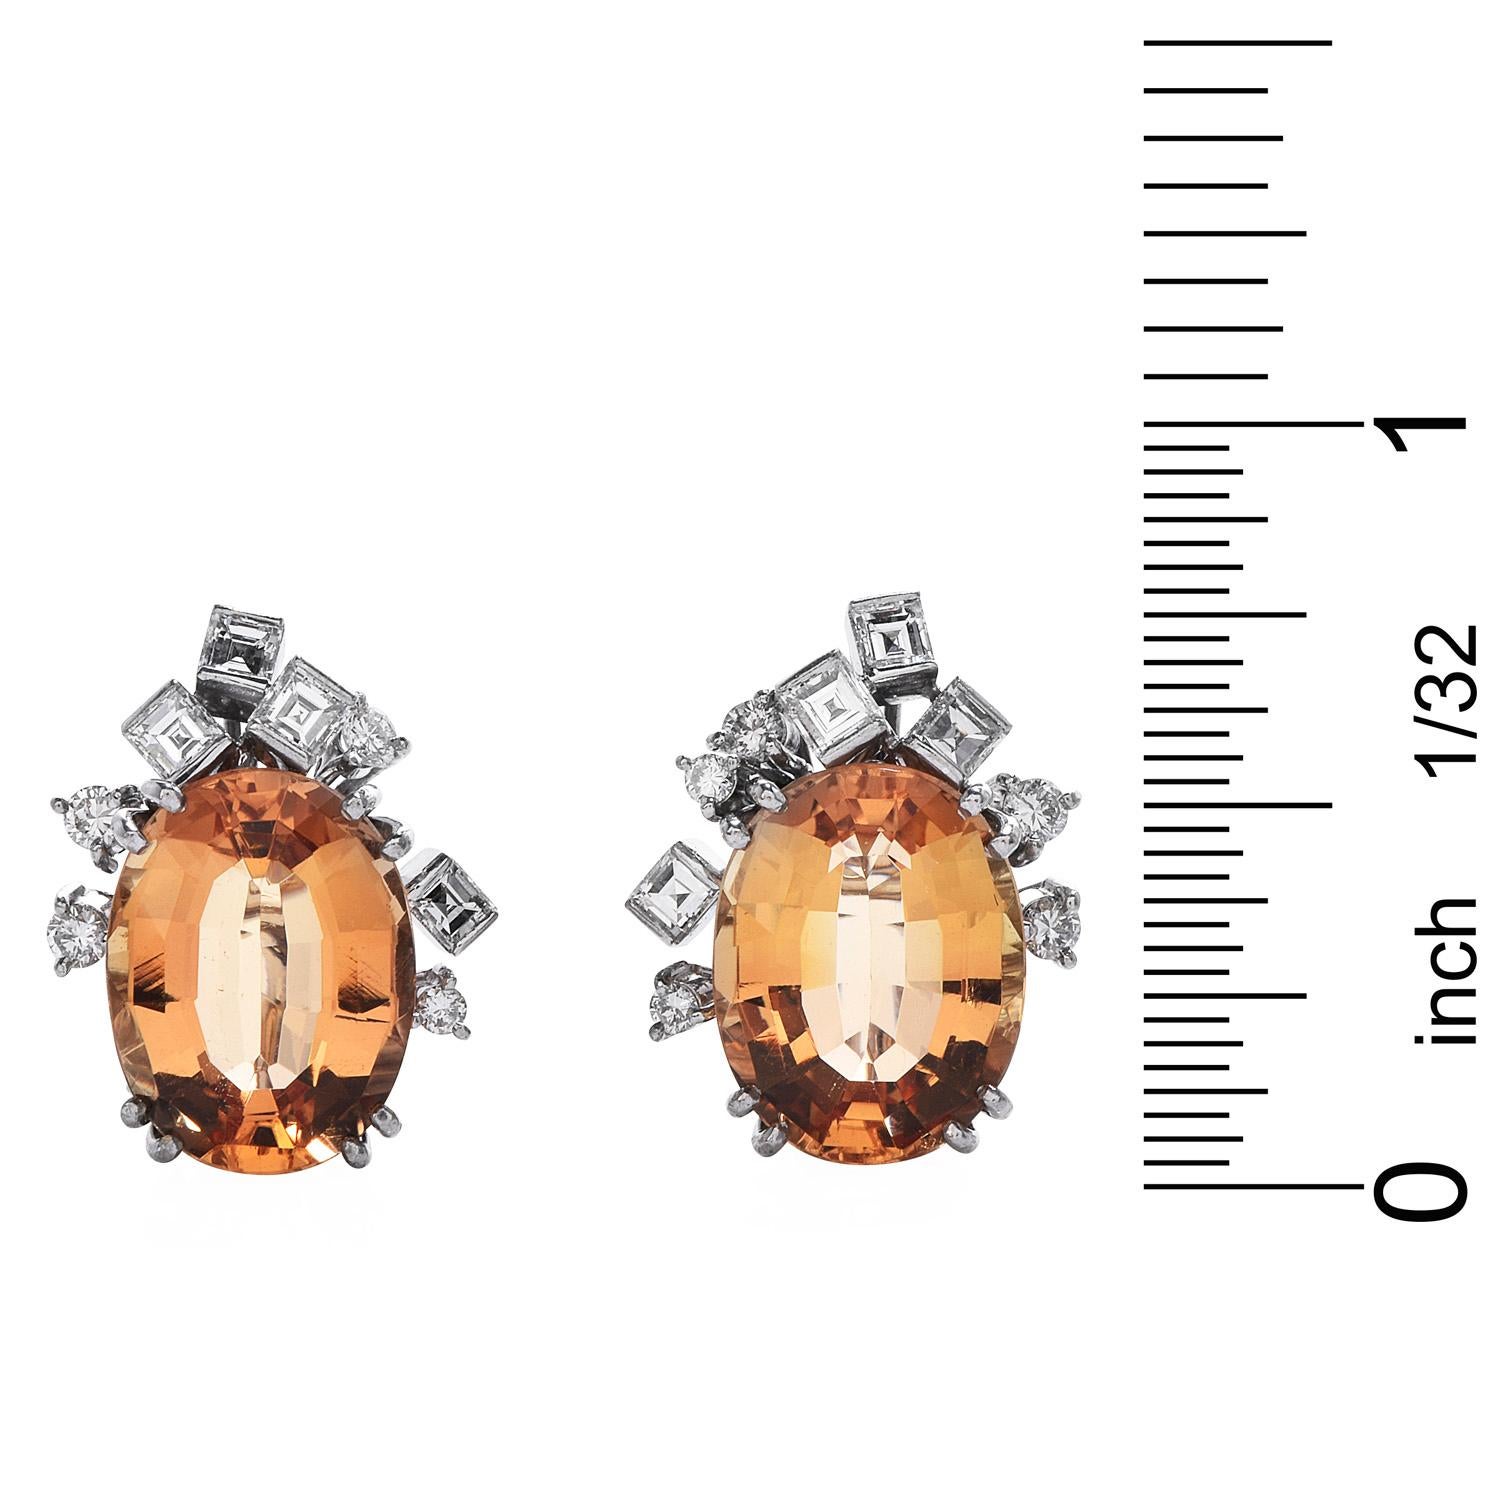 GIA 10.60cts Imperial Topaz Diamond 18K Gold Earrings For Sale 1